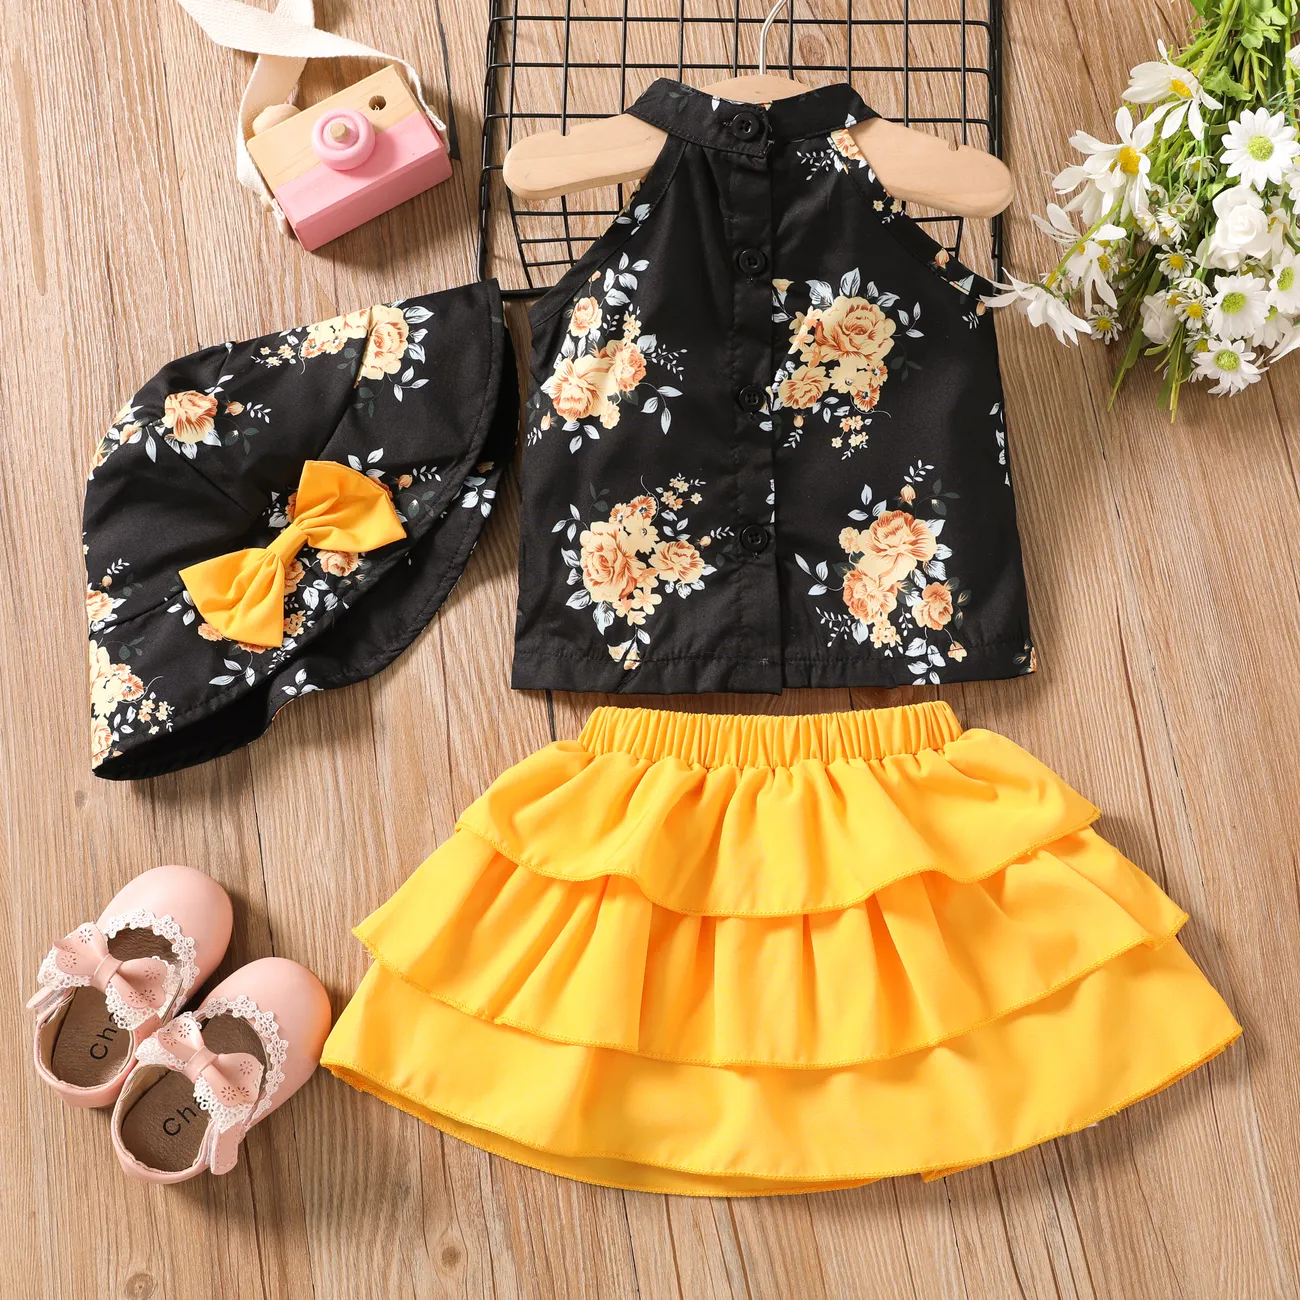 Big Flower Baby Girl 3pcs Sleeveless Suit Dress in Sweet Style, Polyester and Spandex, Regular Wash Yellow big image 1